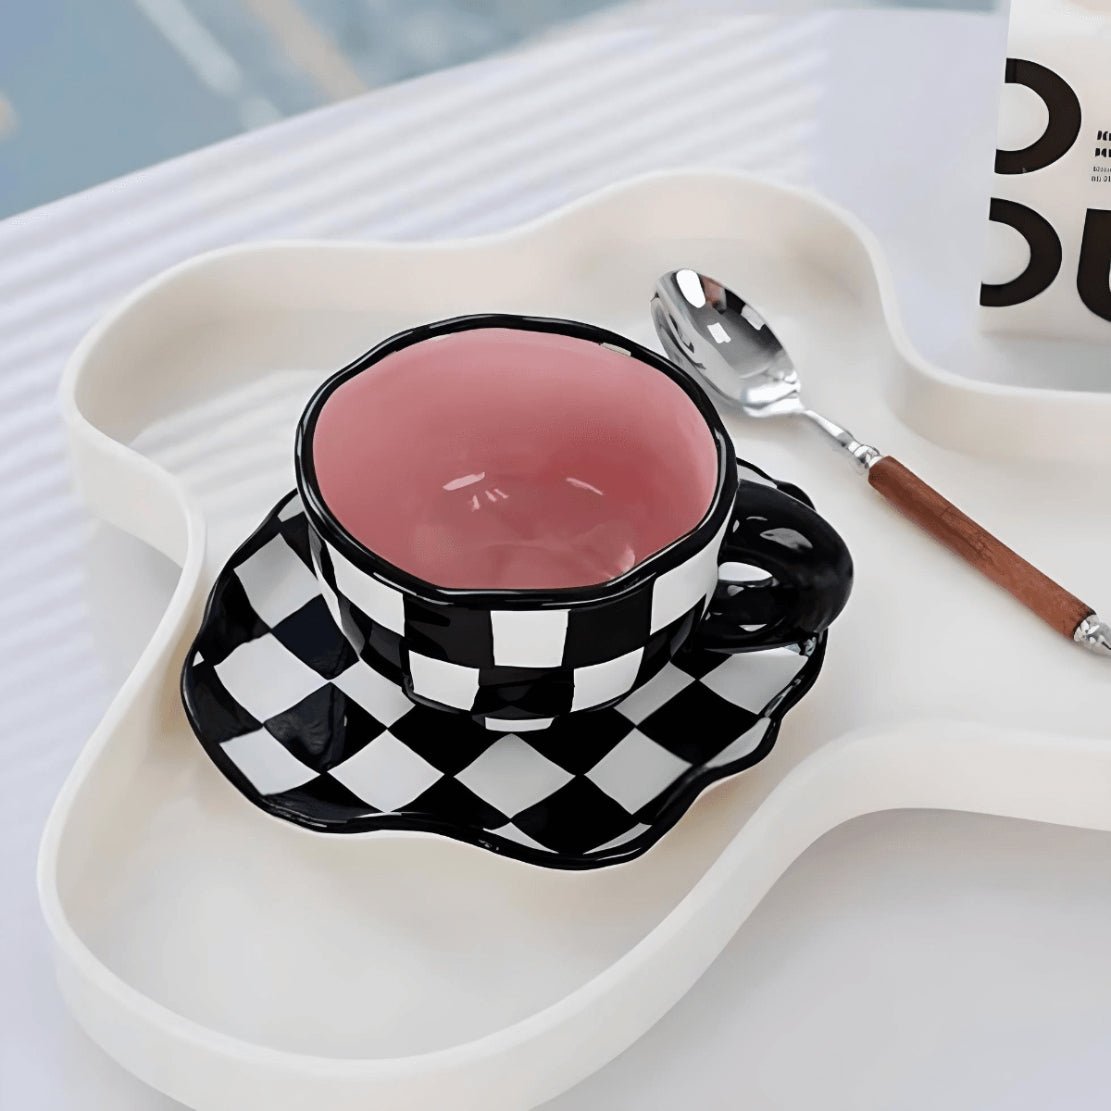 Black white pink checkerboard mug with saucer on food tray